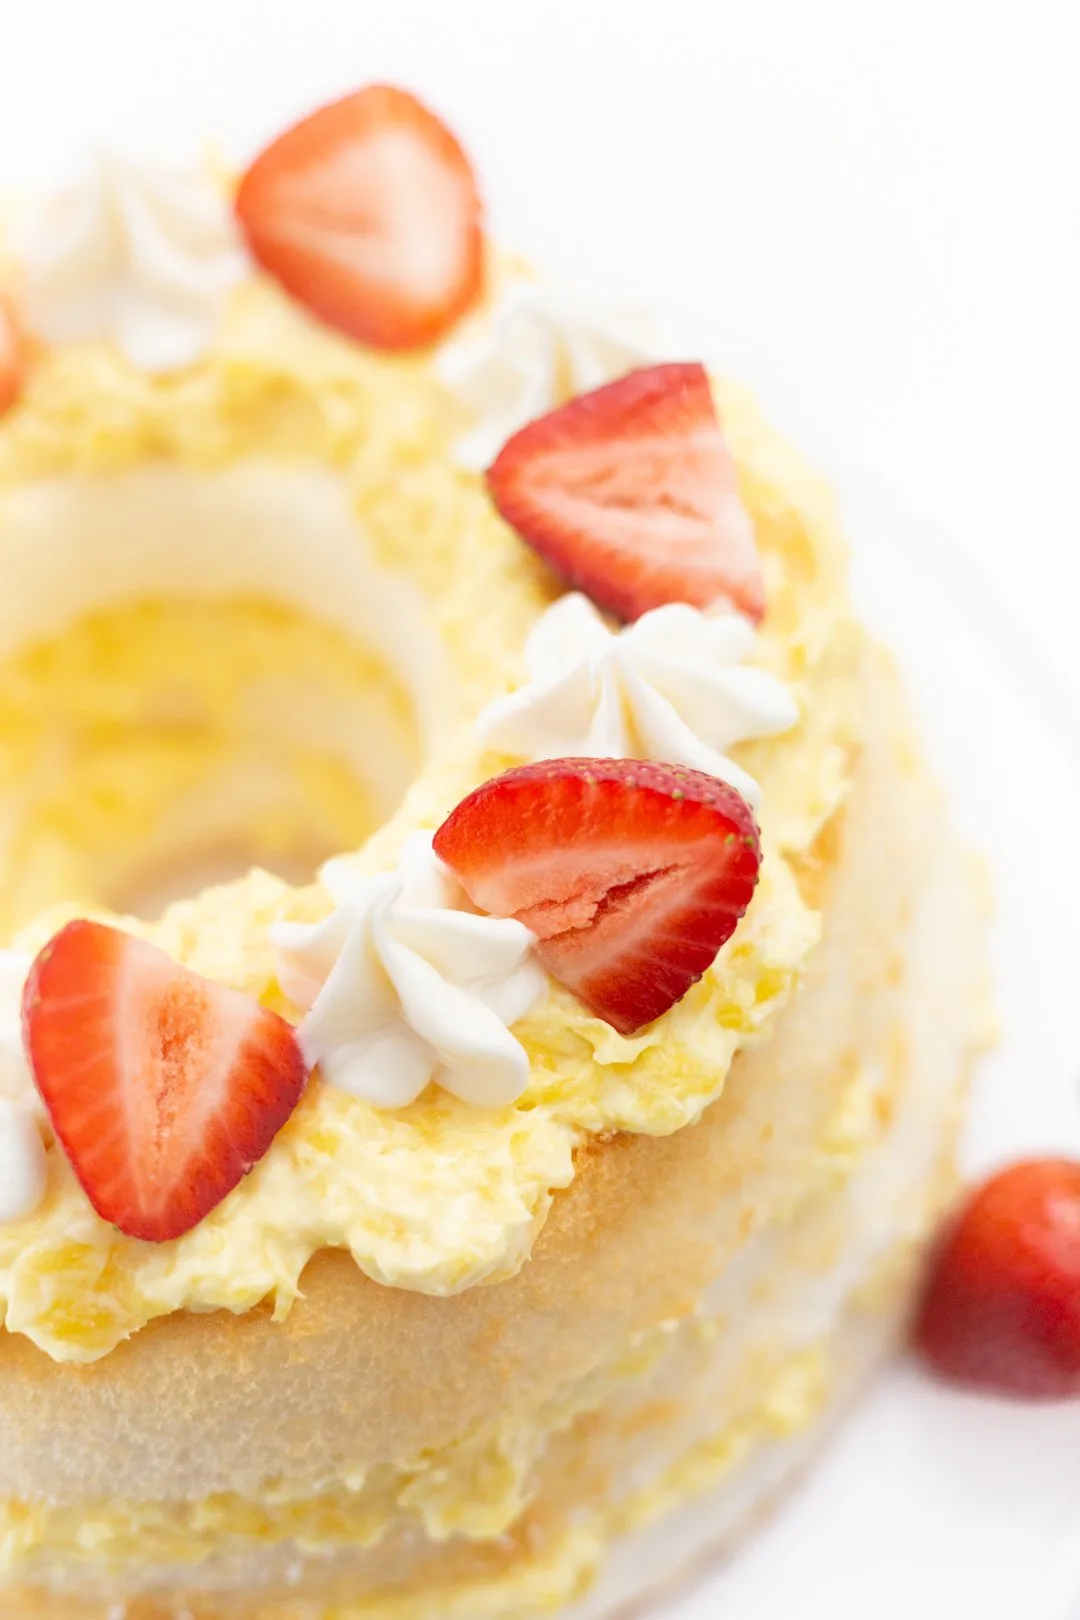 Pineapple Layered Cake Topped with Strawberries